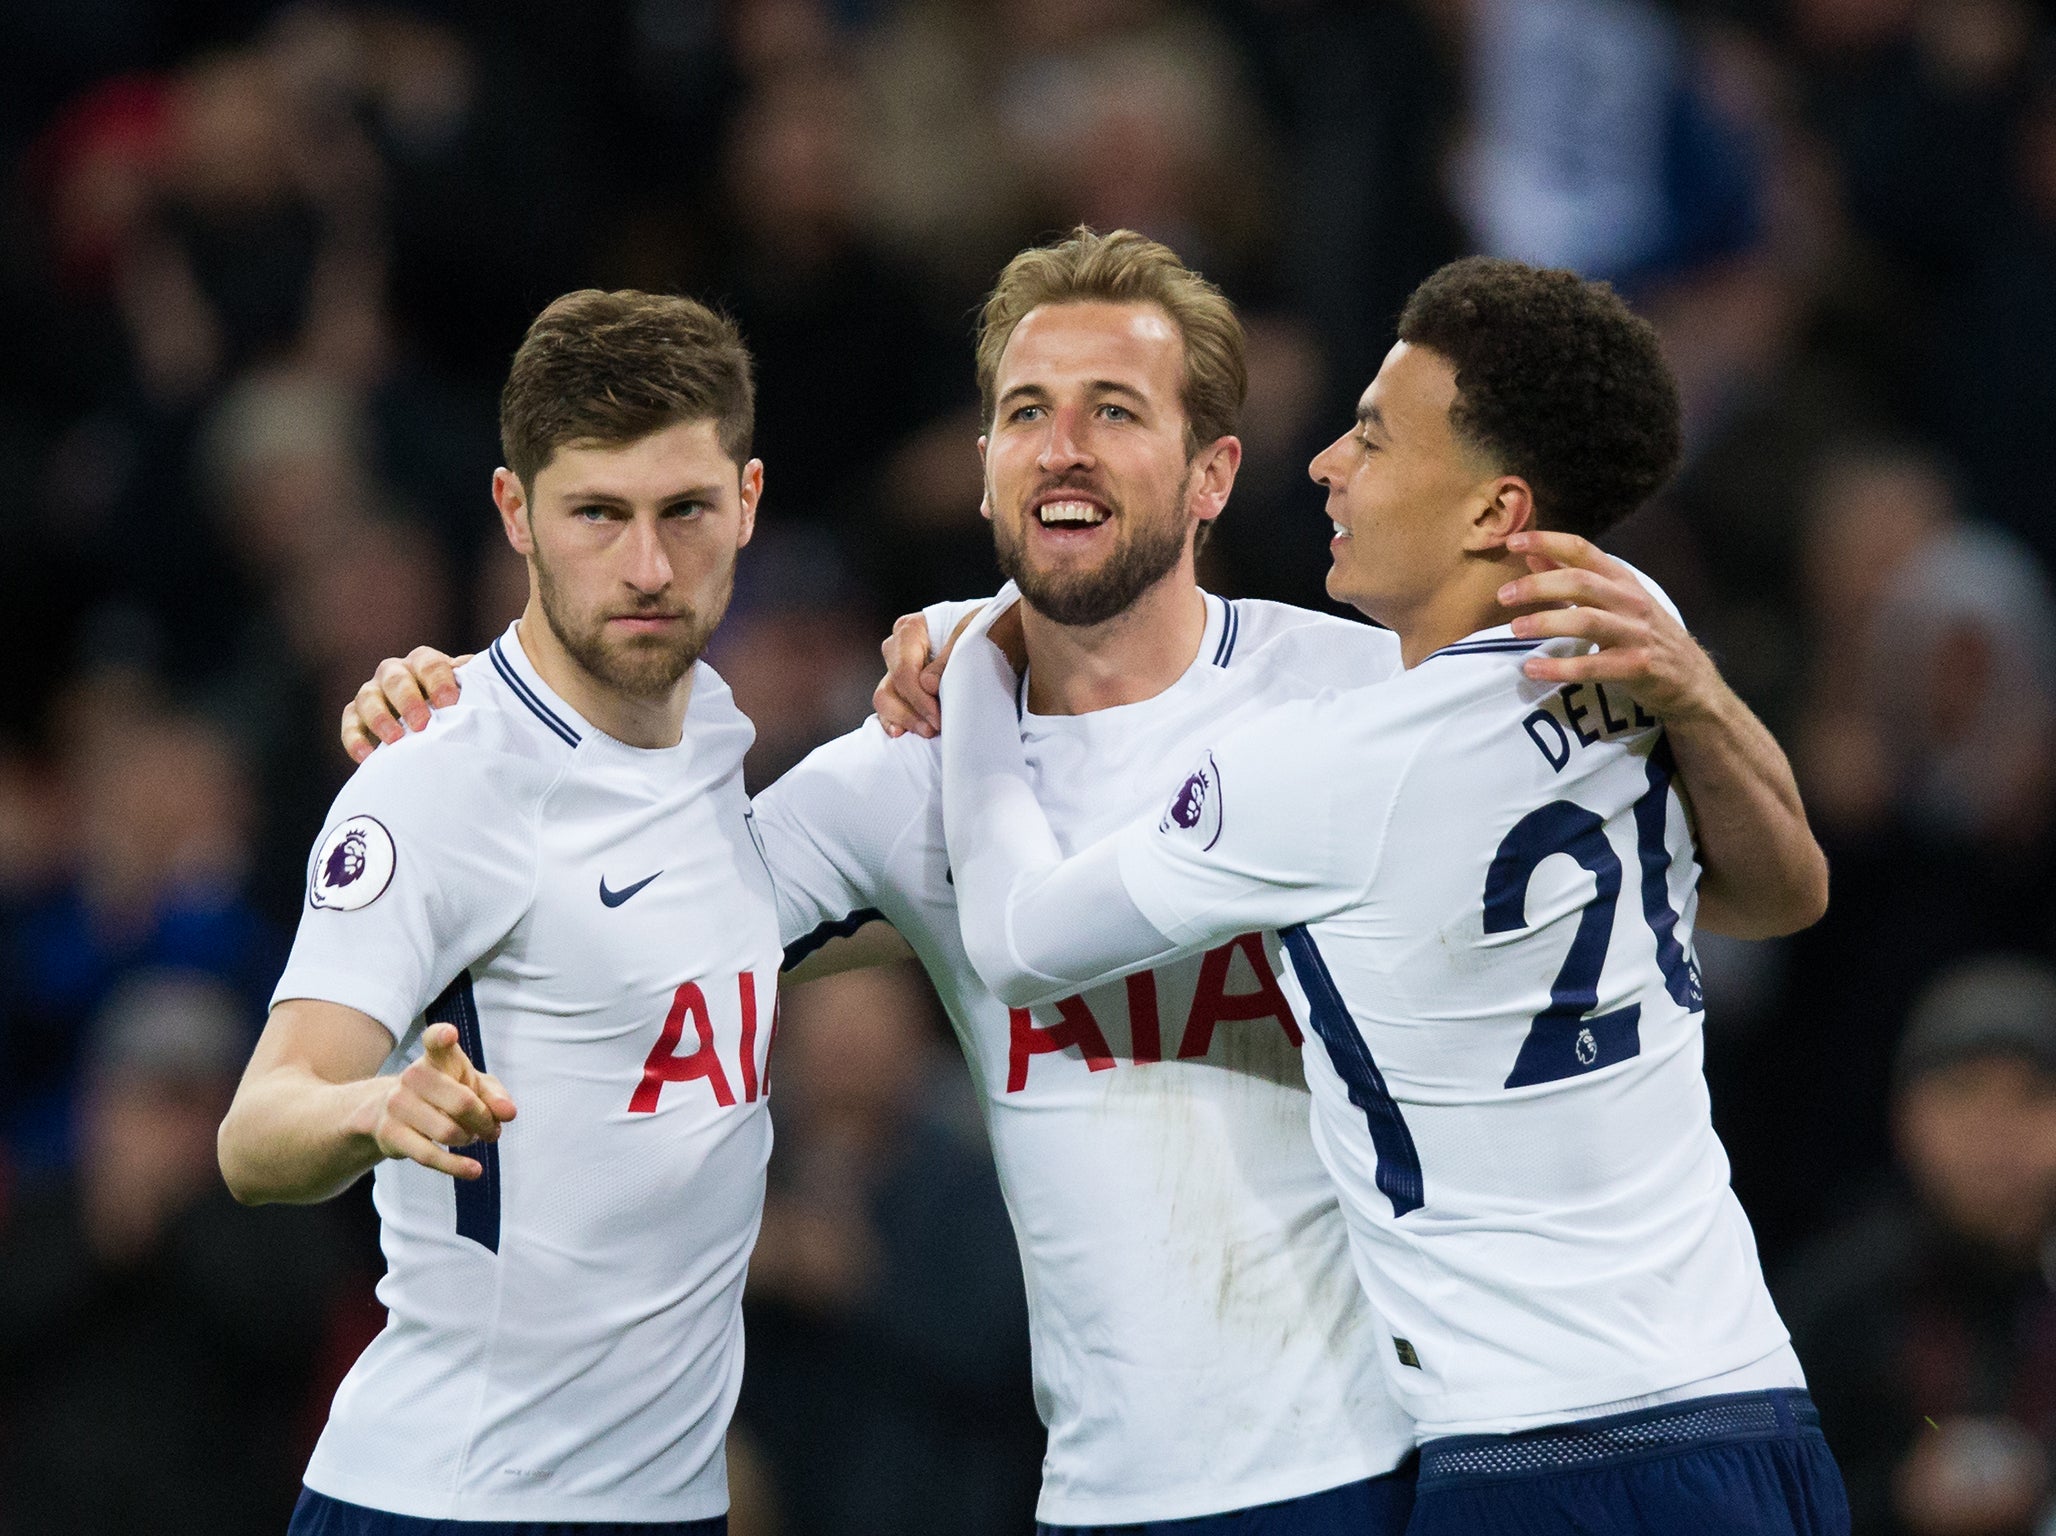 Tottenham strengthened their position in the top four